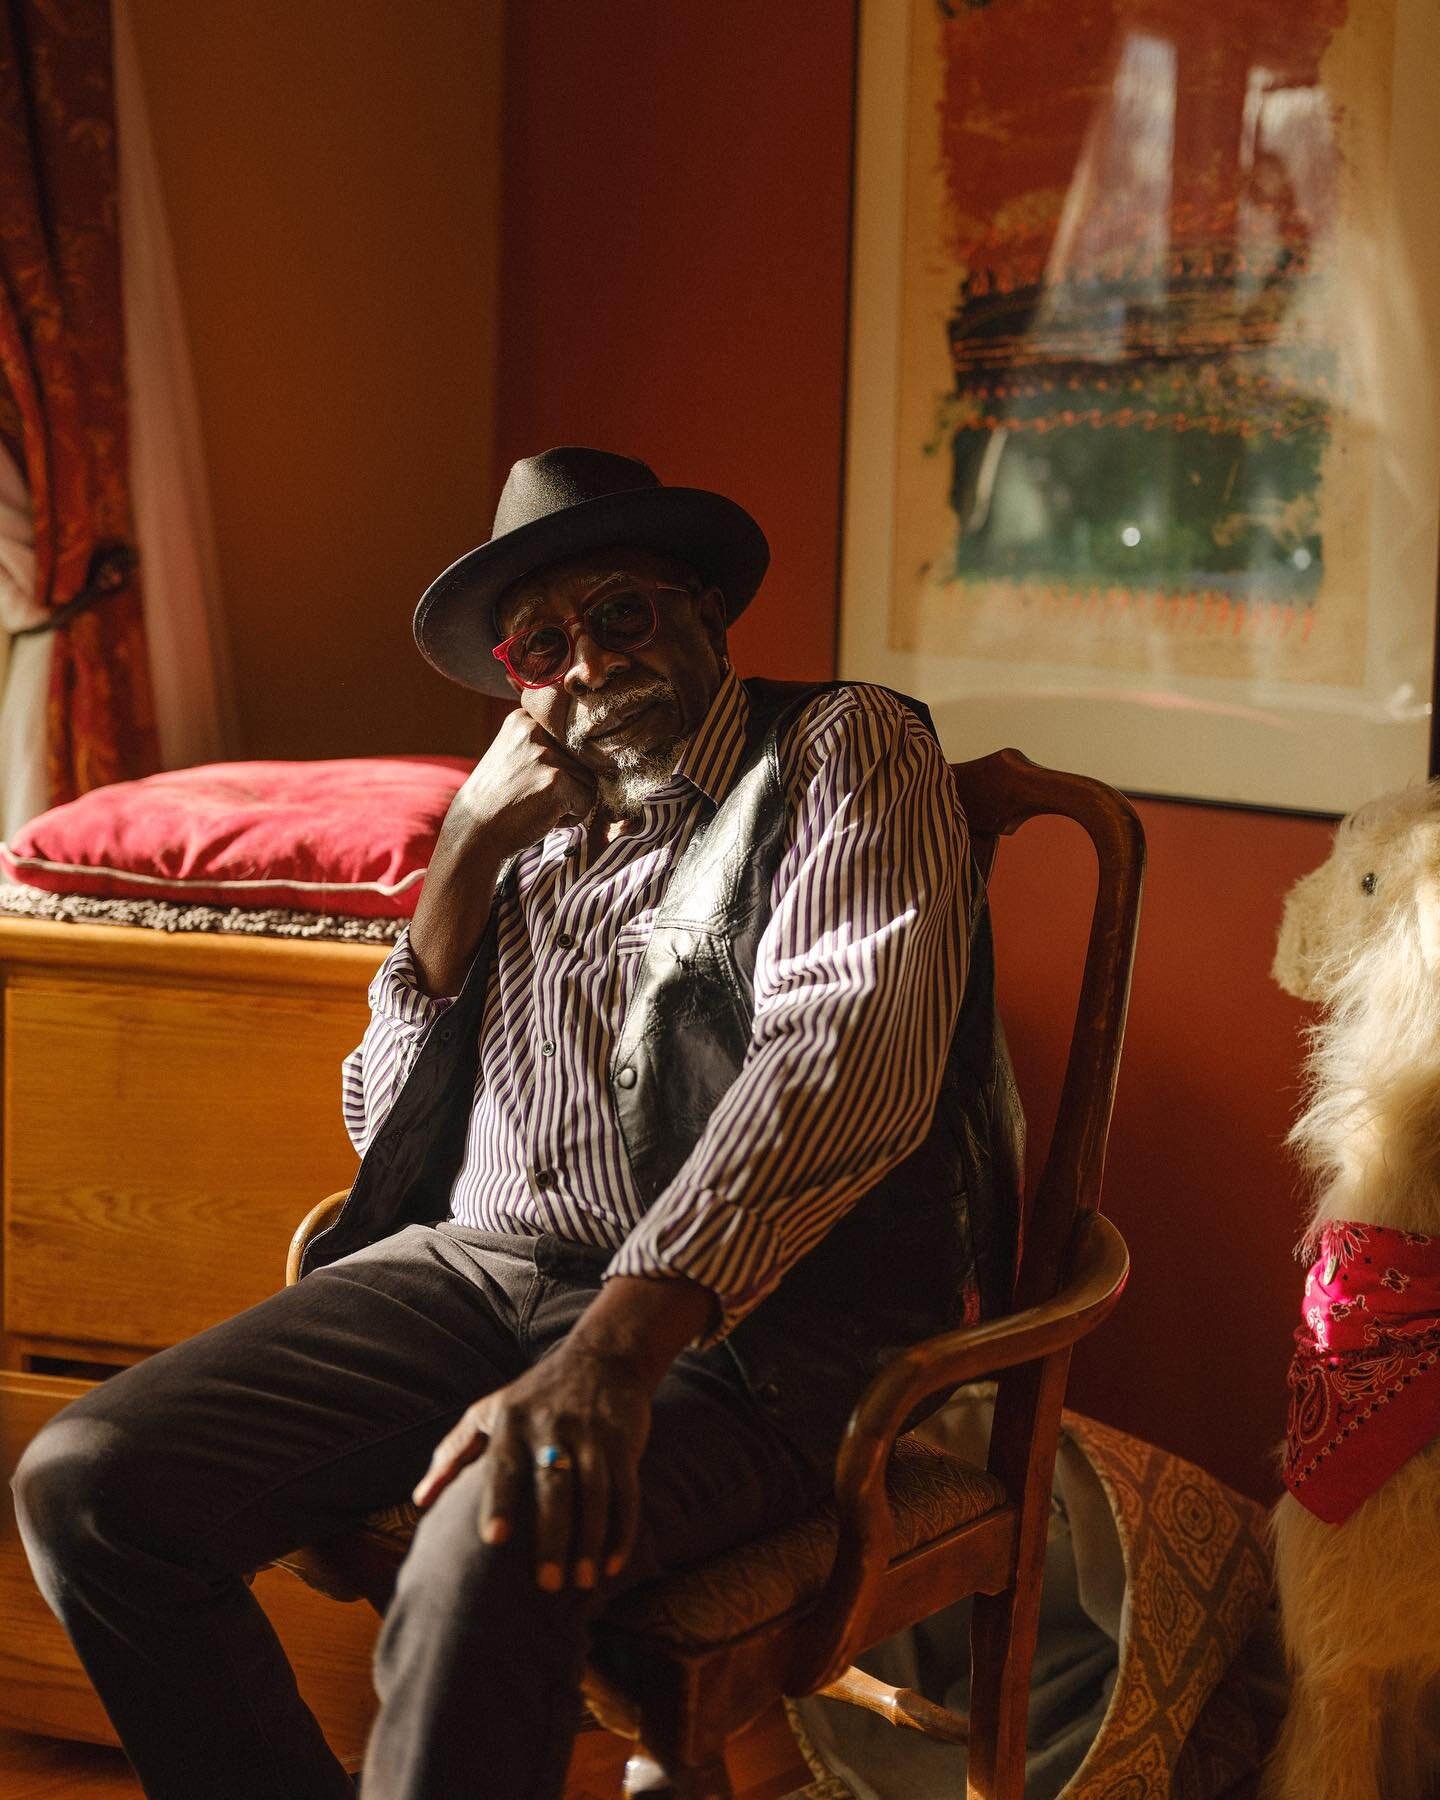 I spent a particularly beautiful morning with Blues legend Freddie Cunningham at his warm and inviting home here in Lansing. Freddie and his wonderful wife Marge share this home with have a couple cats and an amazing collection of curio from an aweso